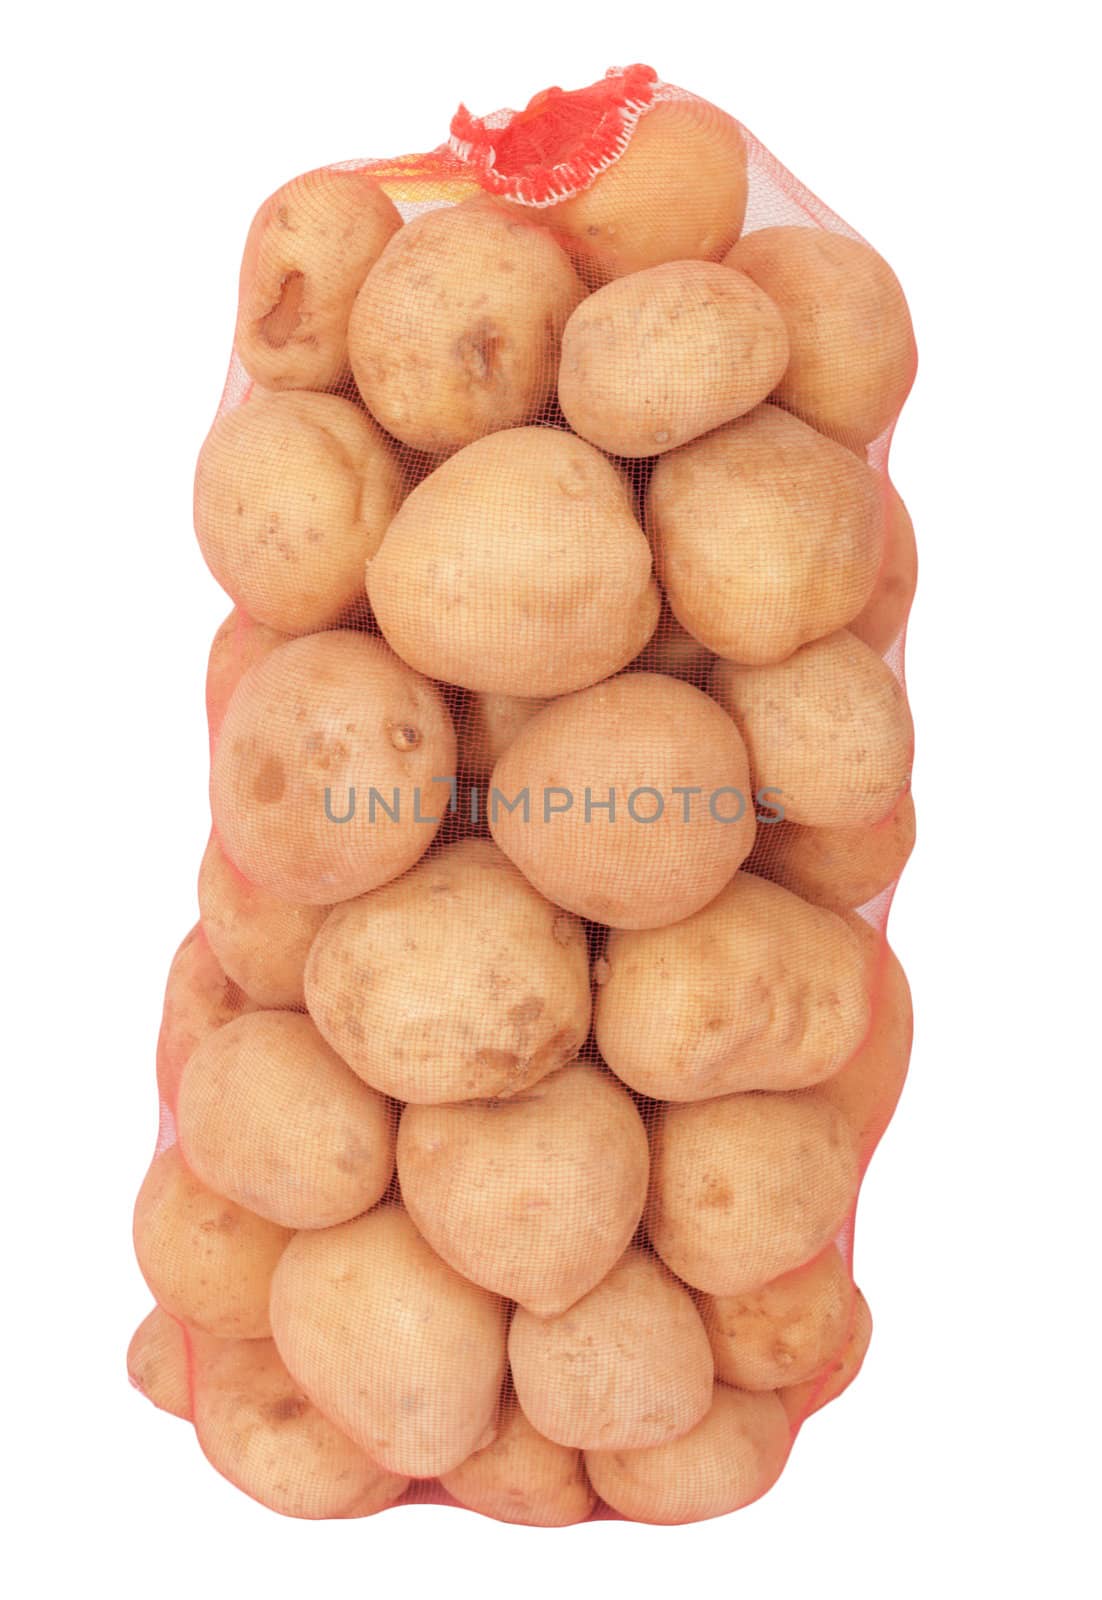 isolated sack of potatoes on white  by schankz